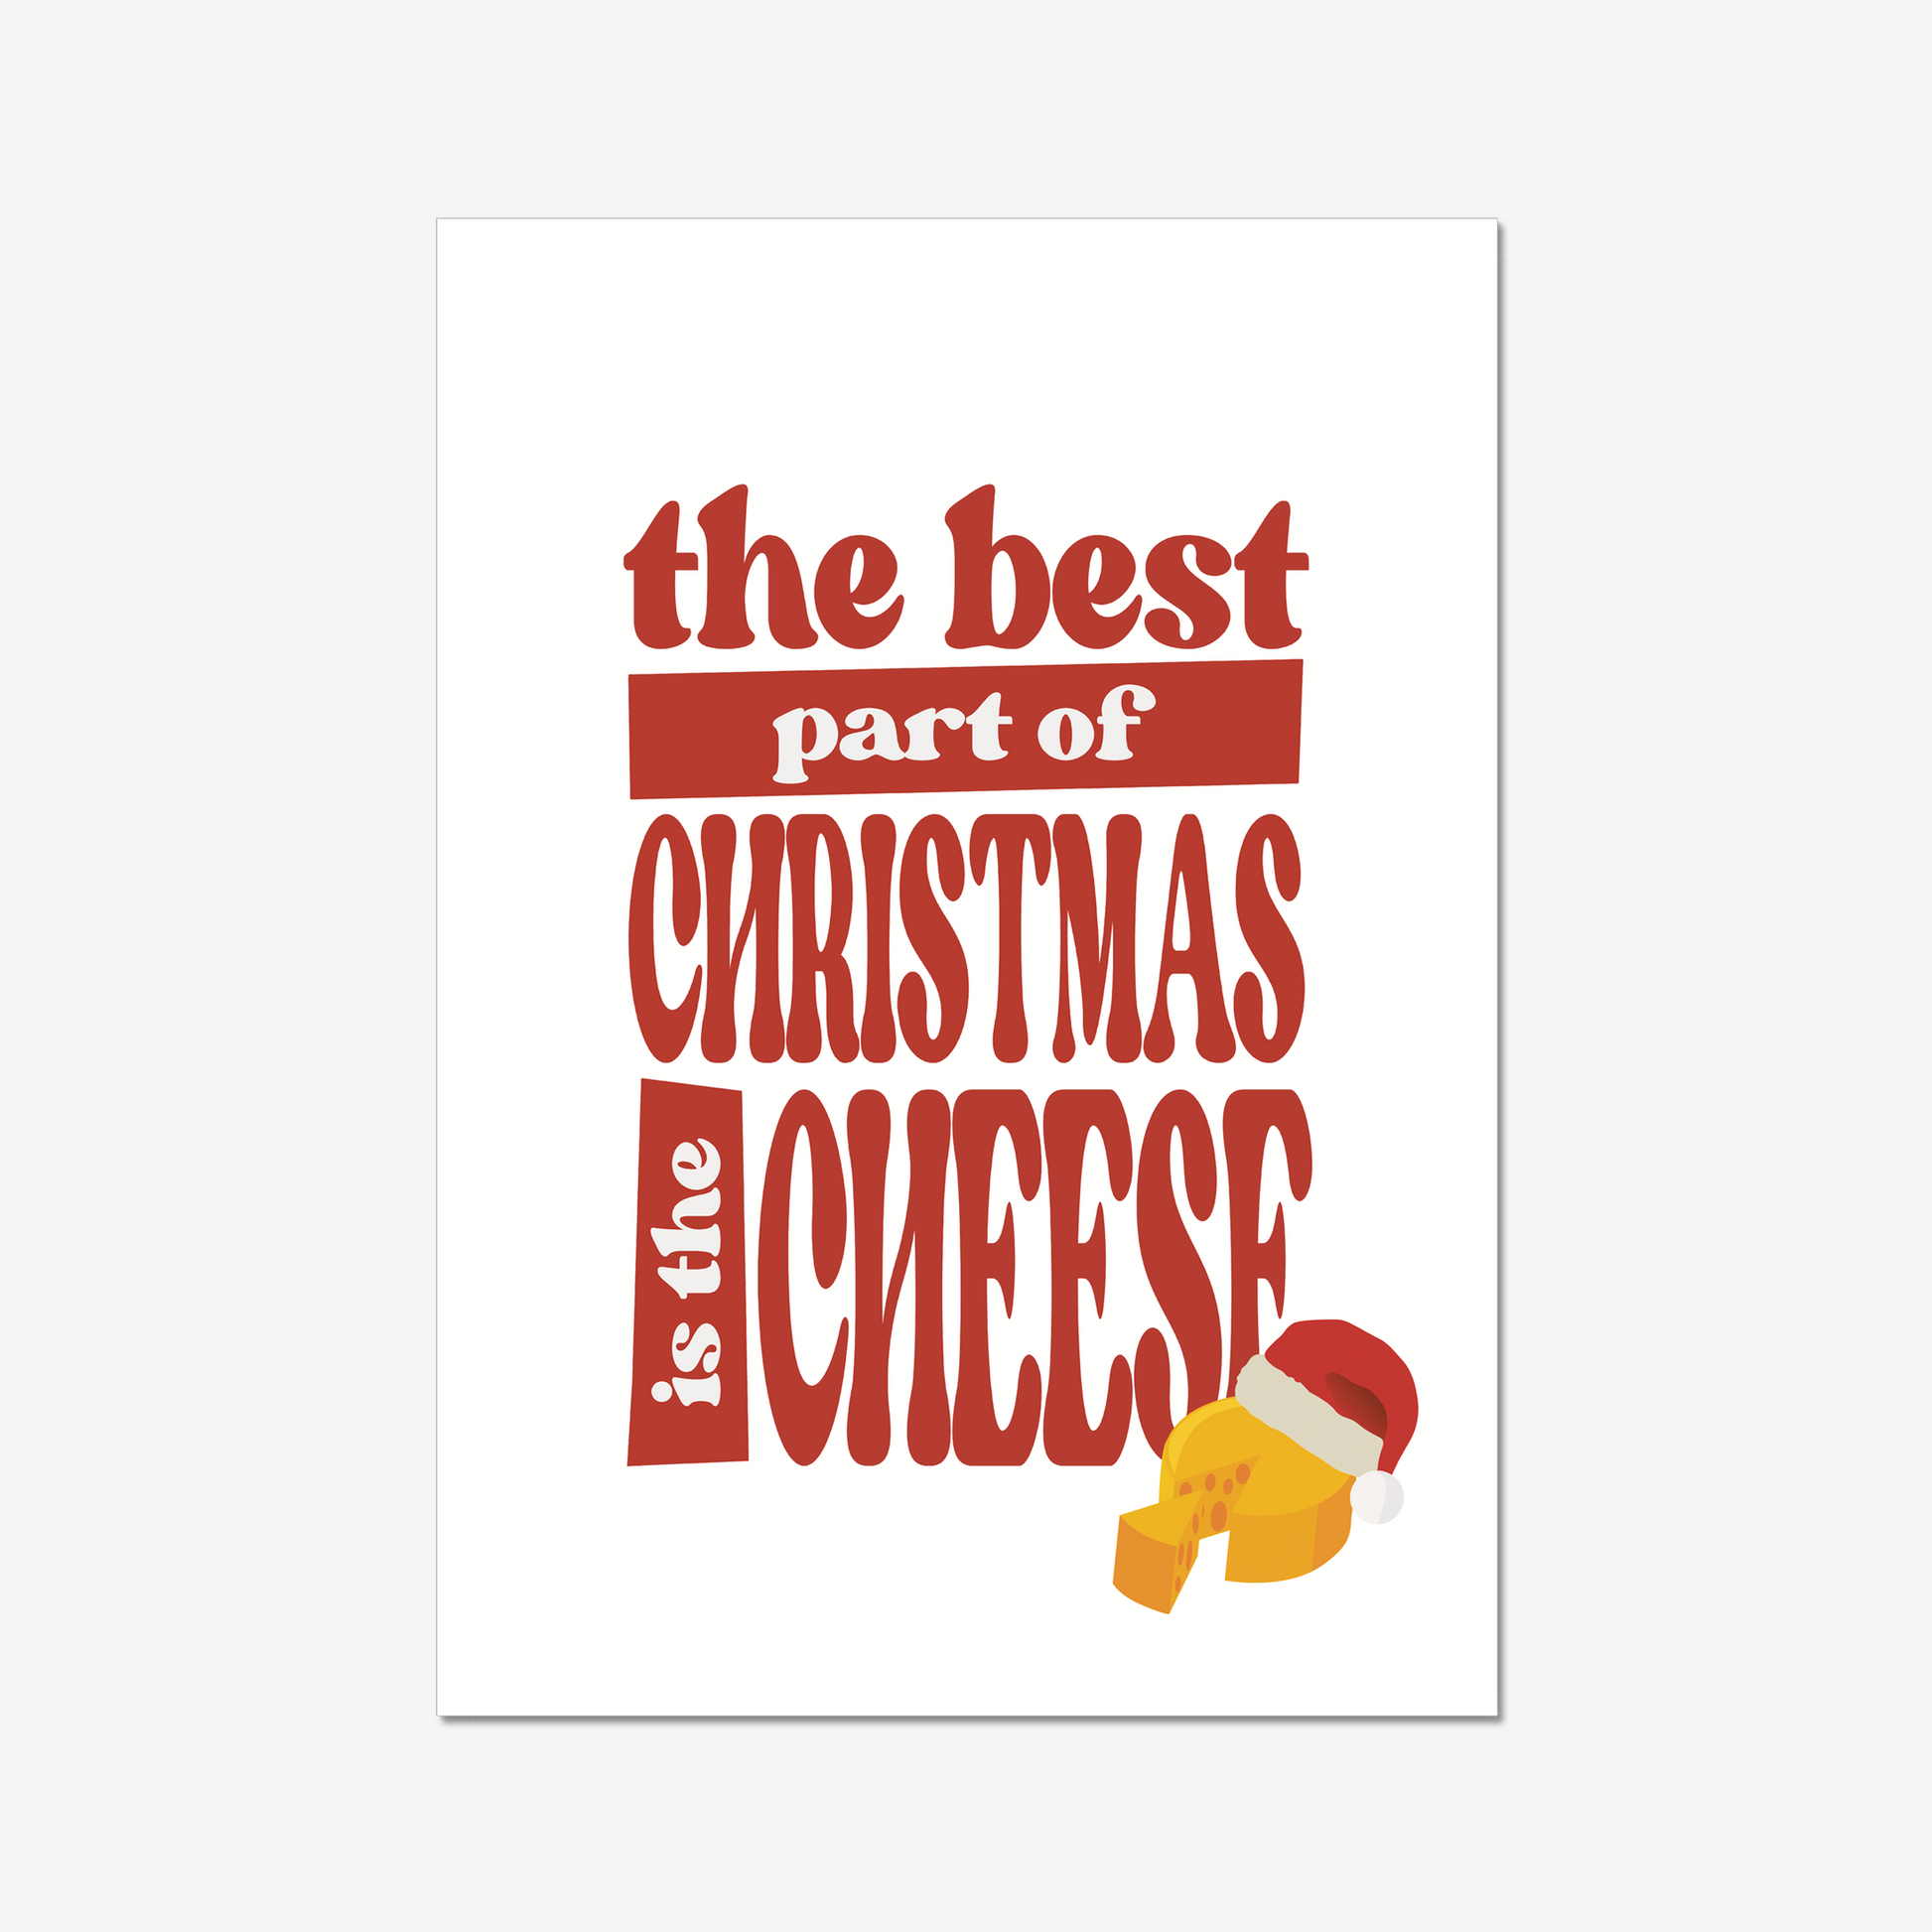 If you love cheese as much as we do, then you'll adore our Christmas Cheese Art Print Poster! This fun and festive print is the perfect way to show your love of all things cheesy this holiday season.